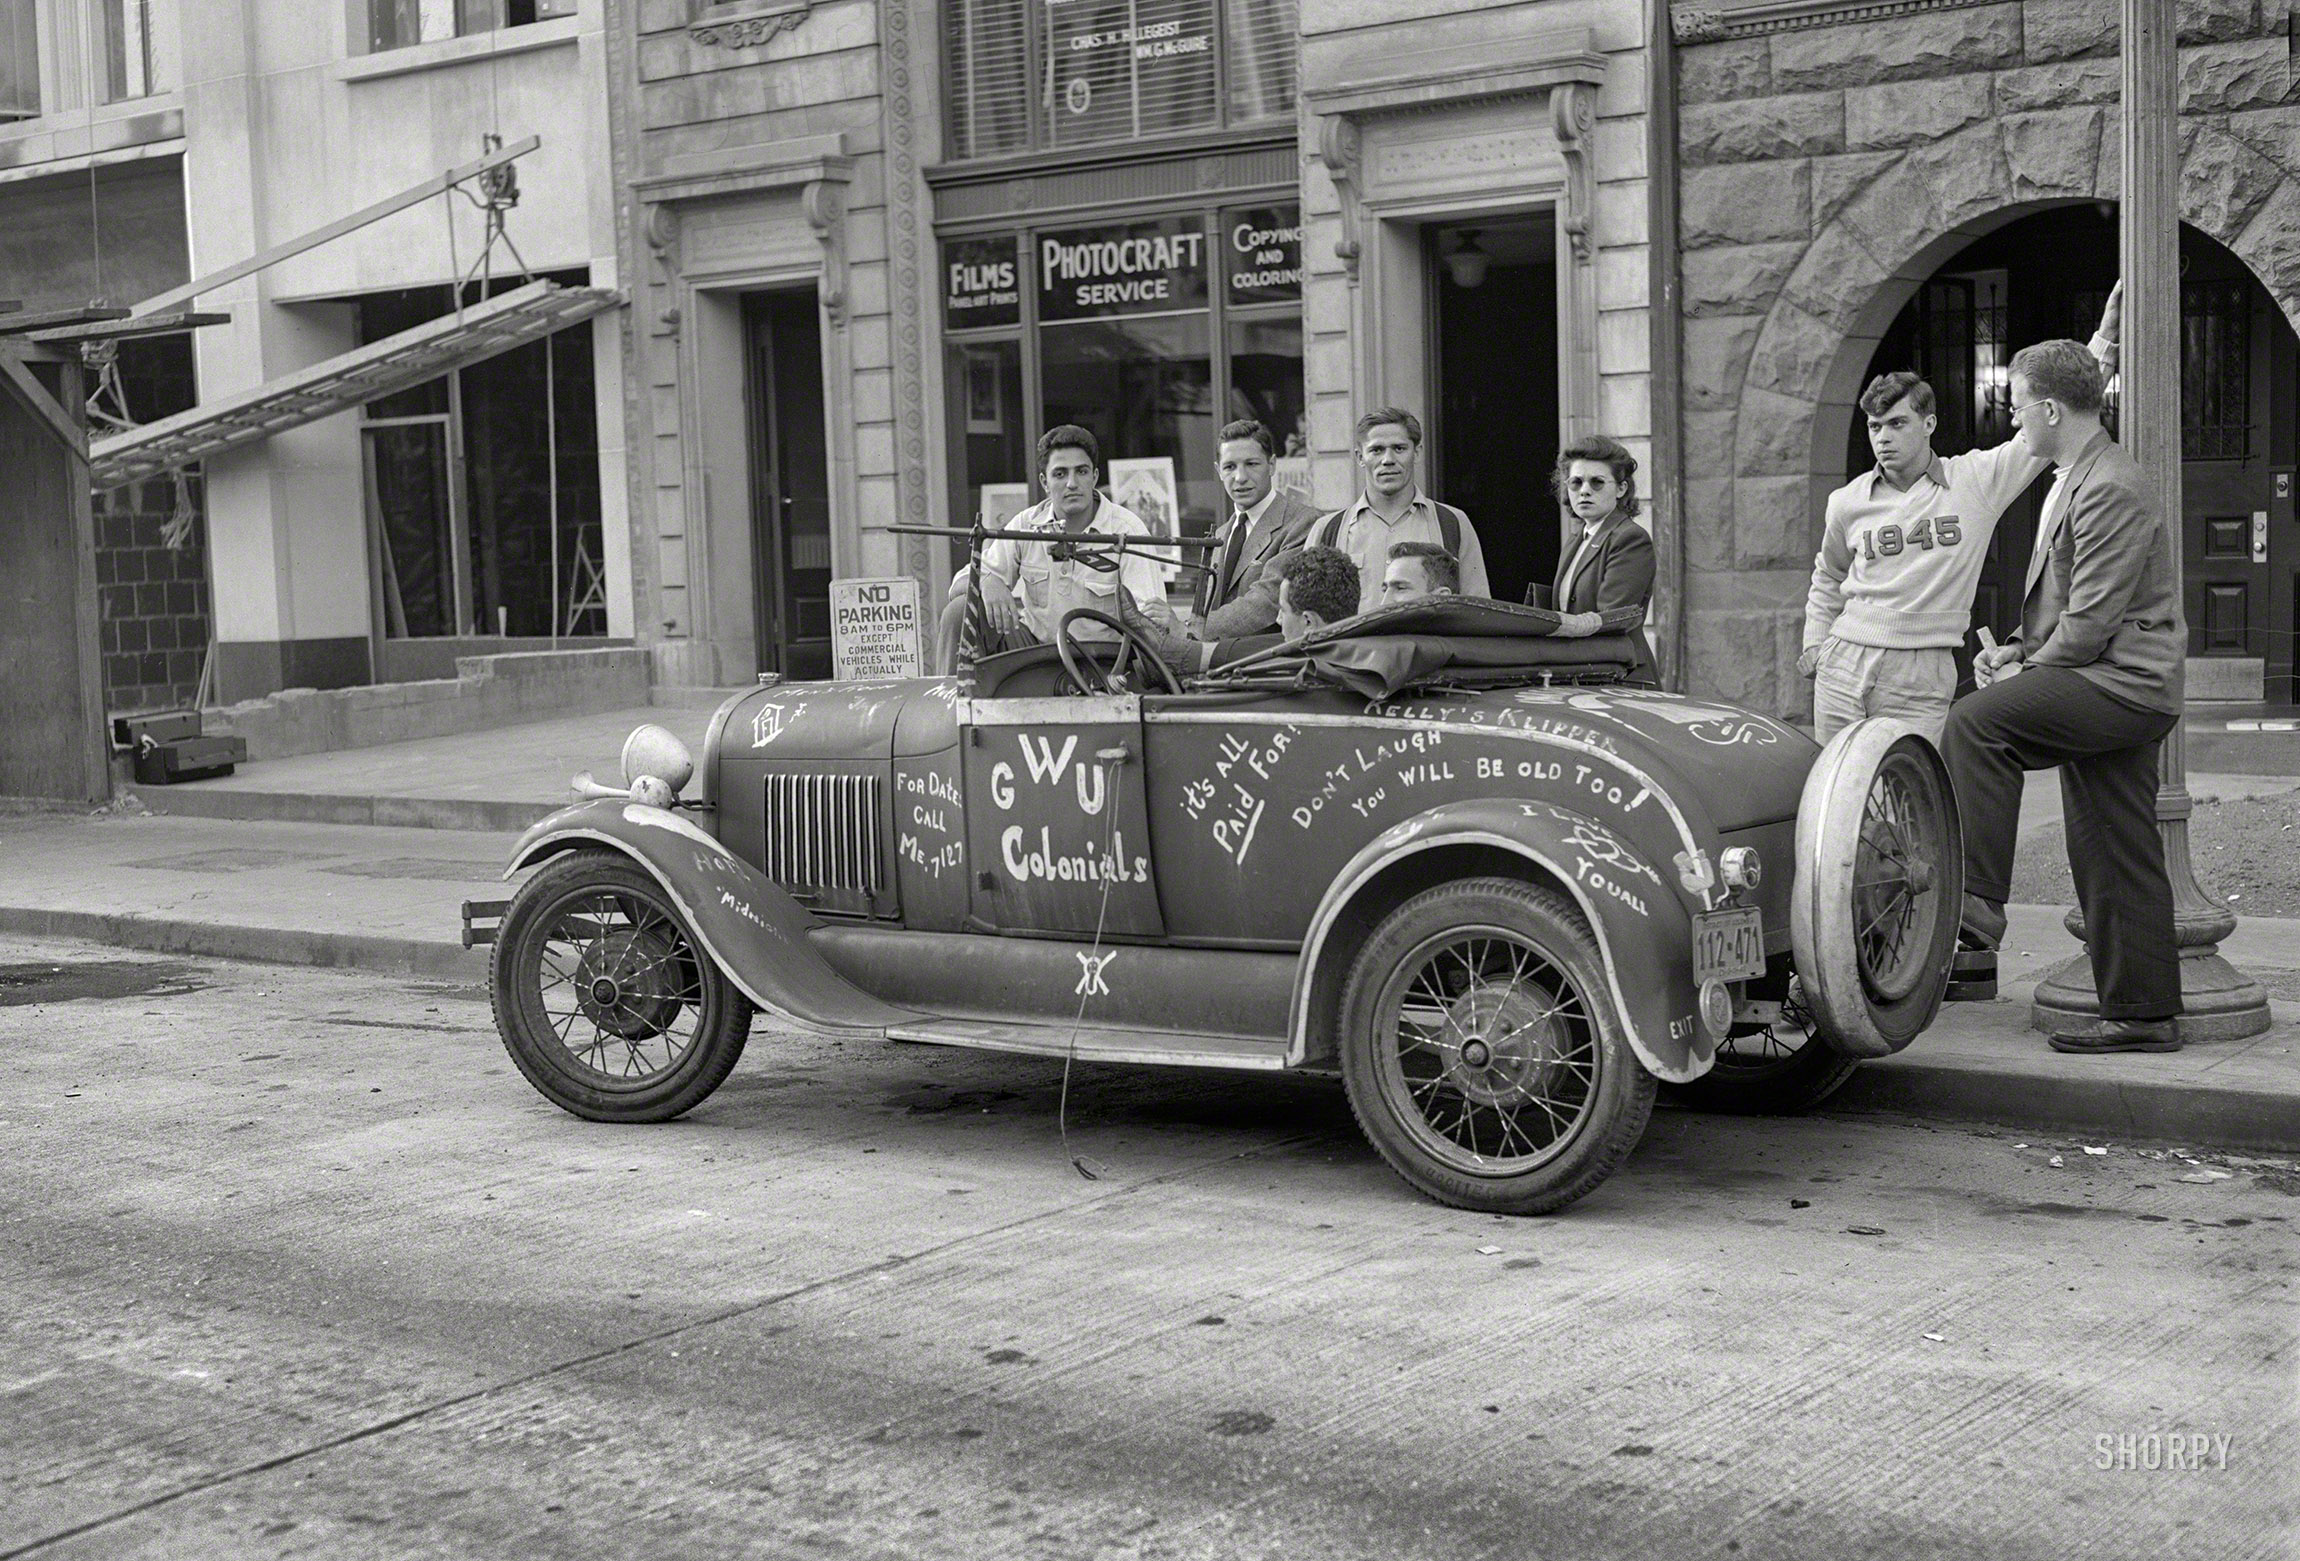 May 1942. Washington, D.C. "Student's car in front of University Club on K Street N.W." Medium format negative by John Ferrell for the Office of War Information. View full size.
